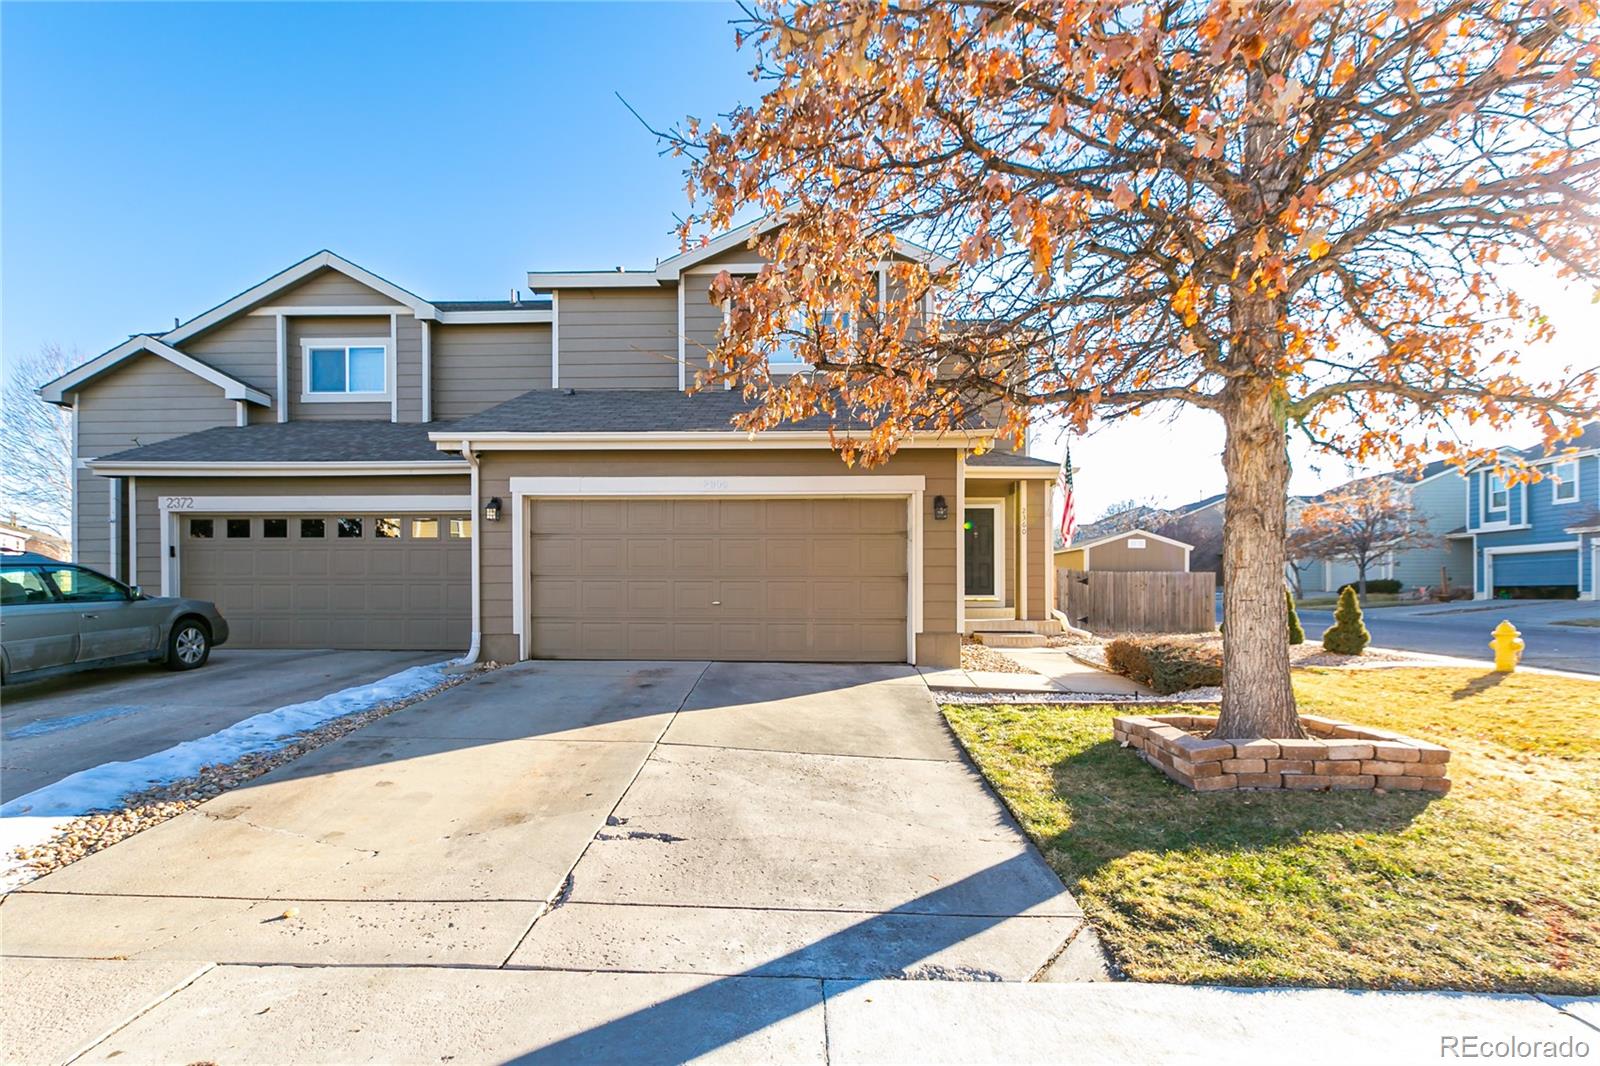 2360 e 111th drive, Northglenn sold home. Closed on 2024-03-04 for $455,000.